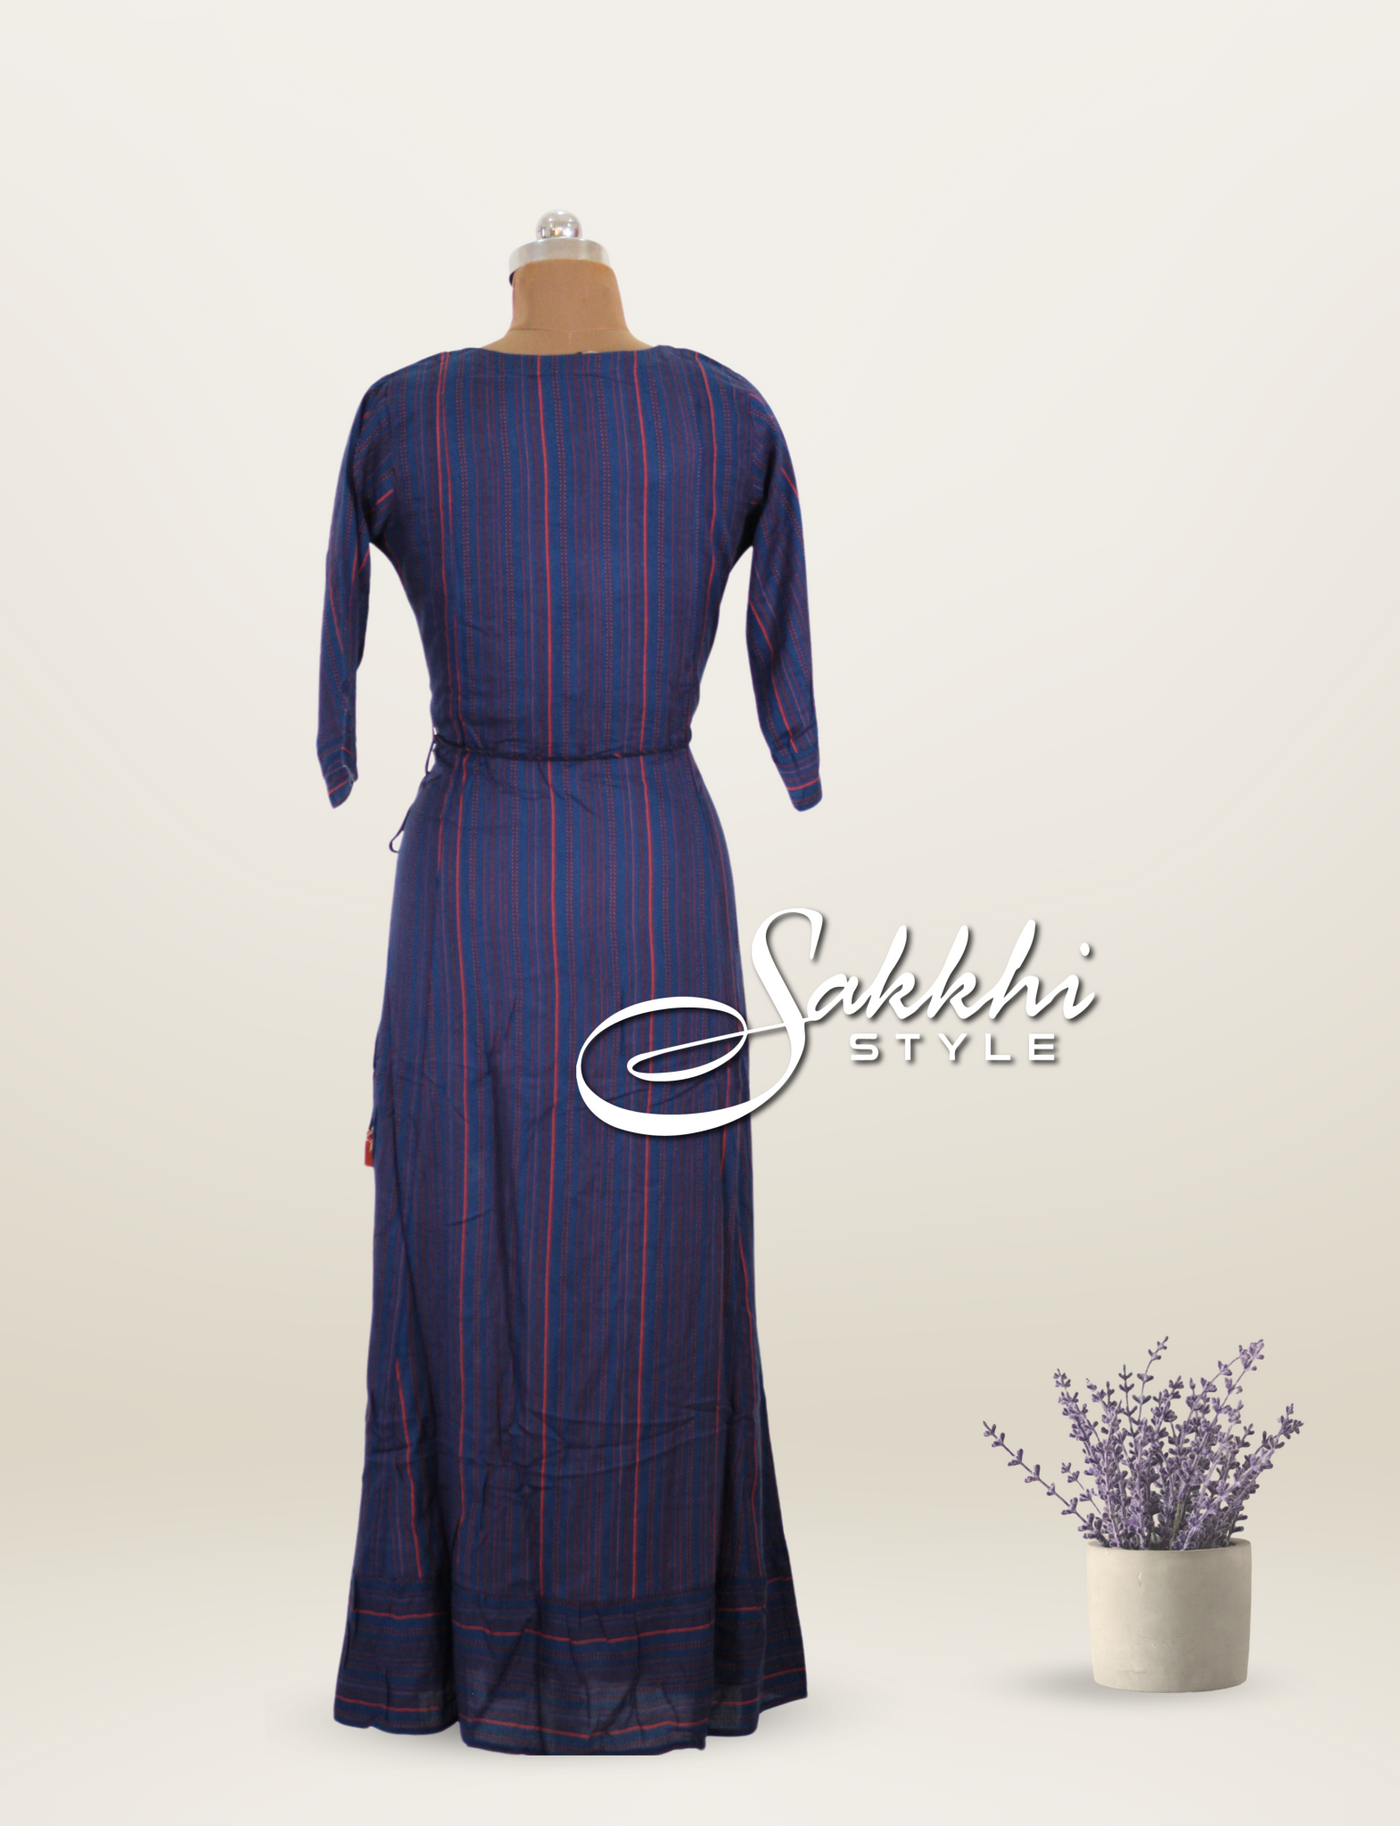 INDIGO BLUE AND WHITE RAYON FULL LENGTH GOWN